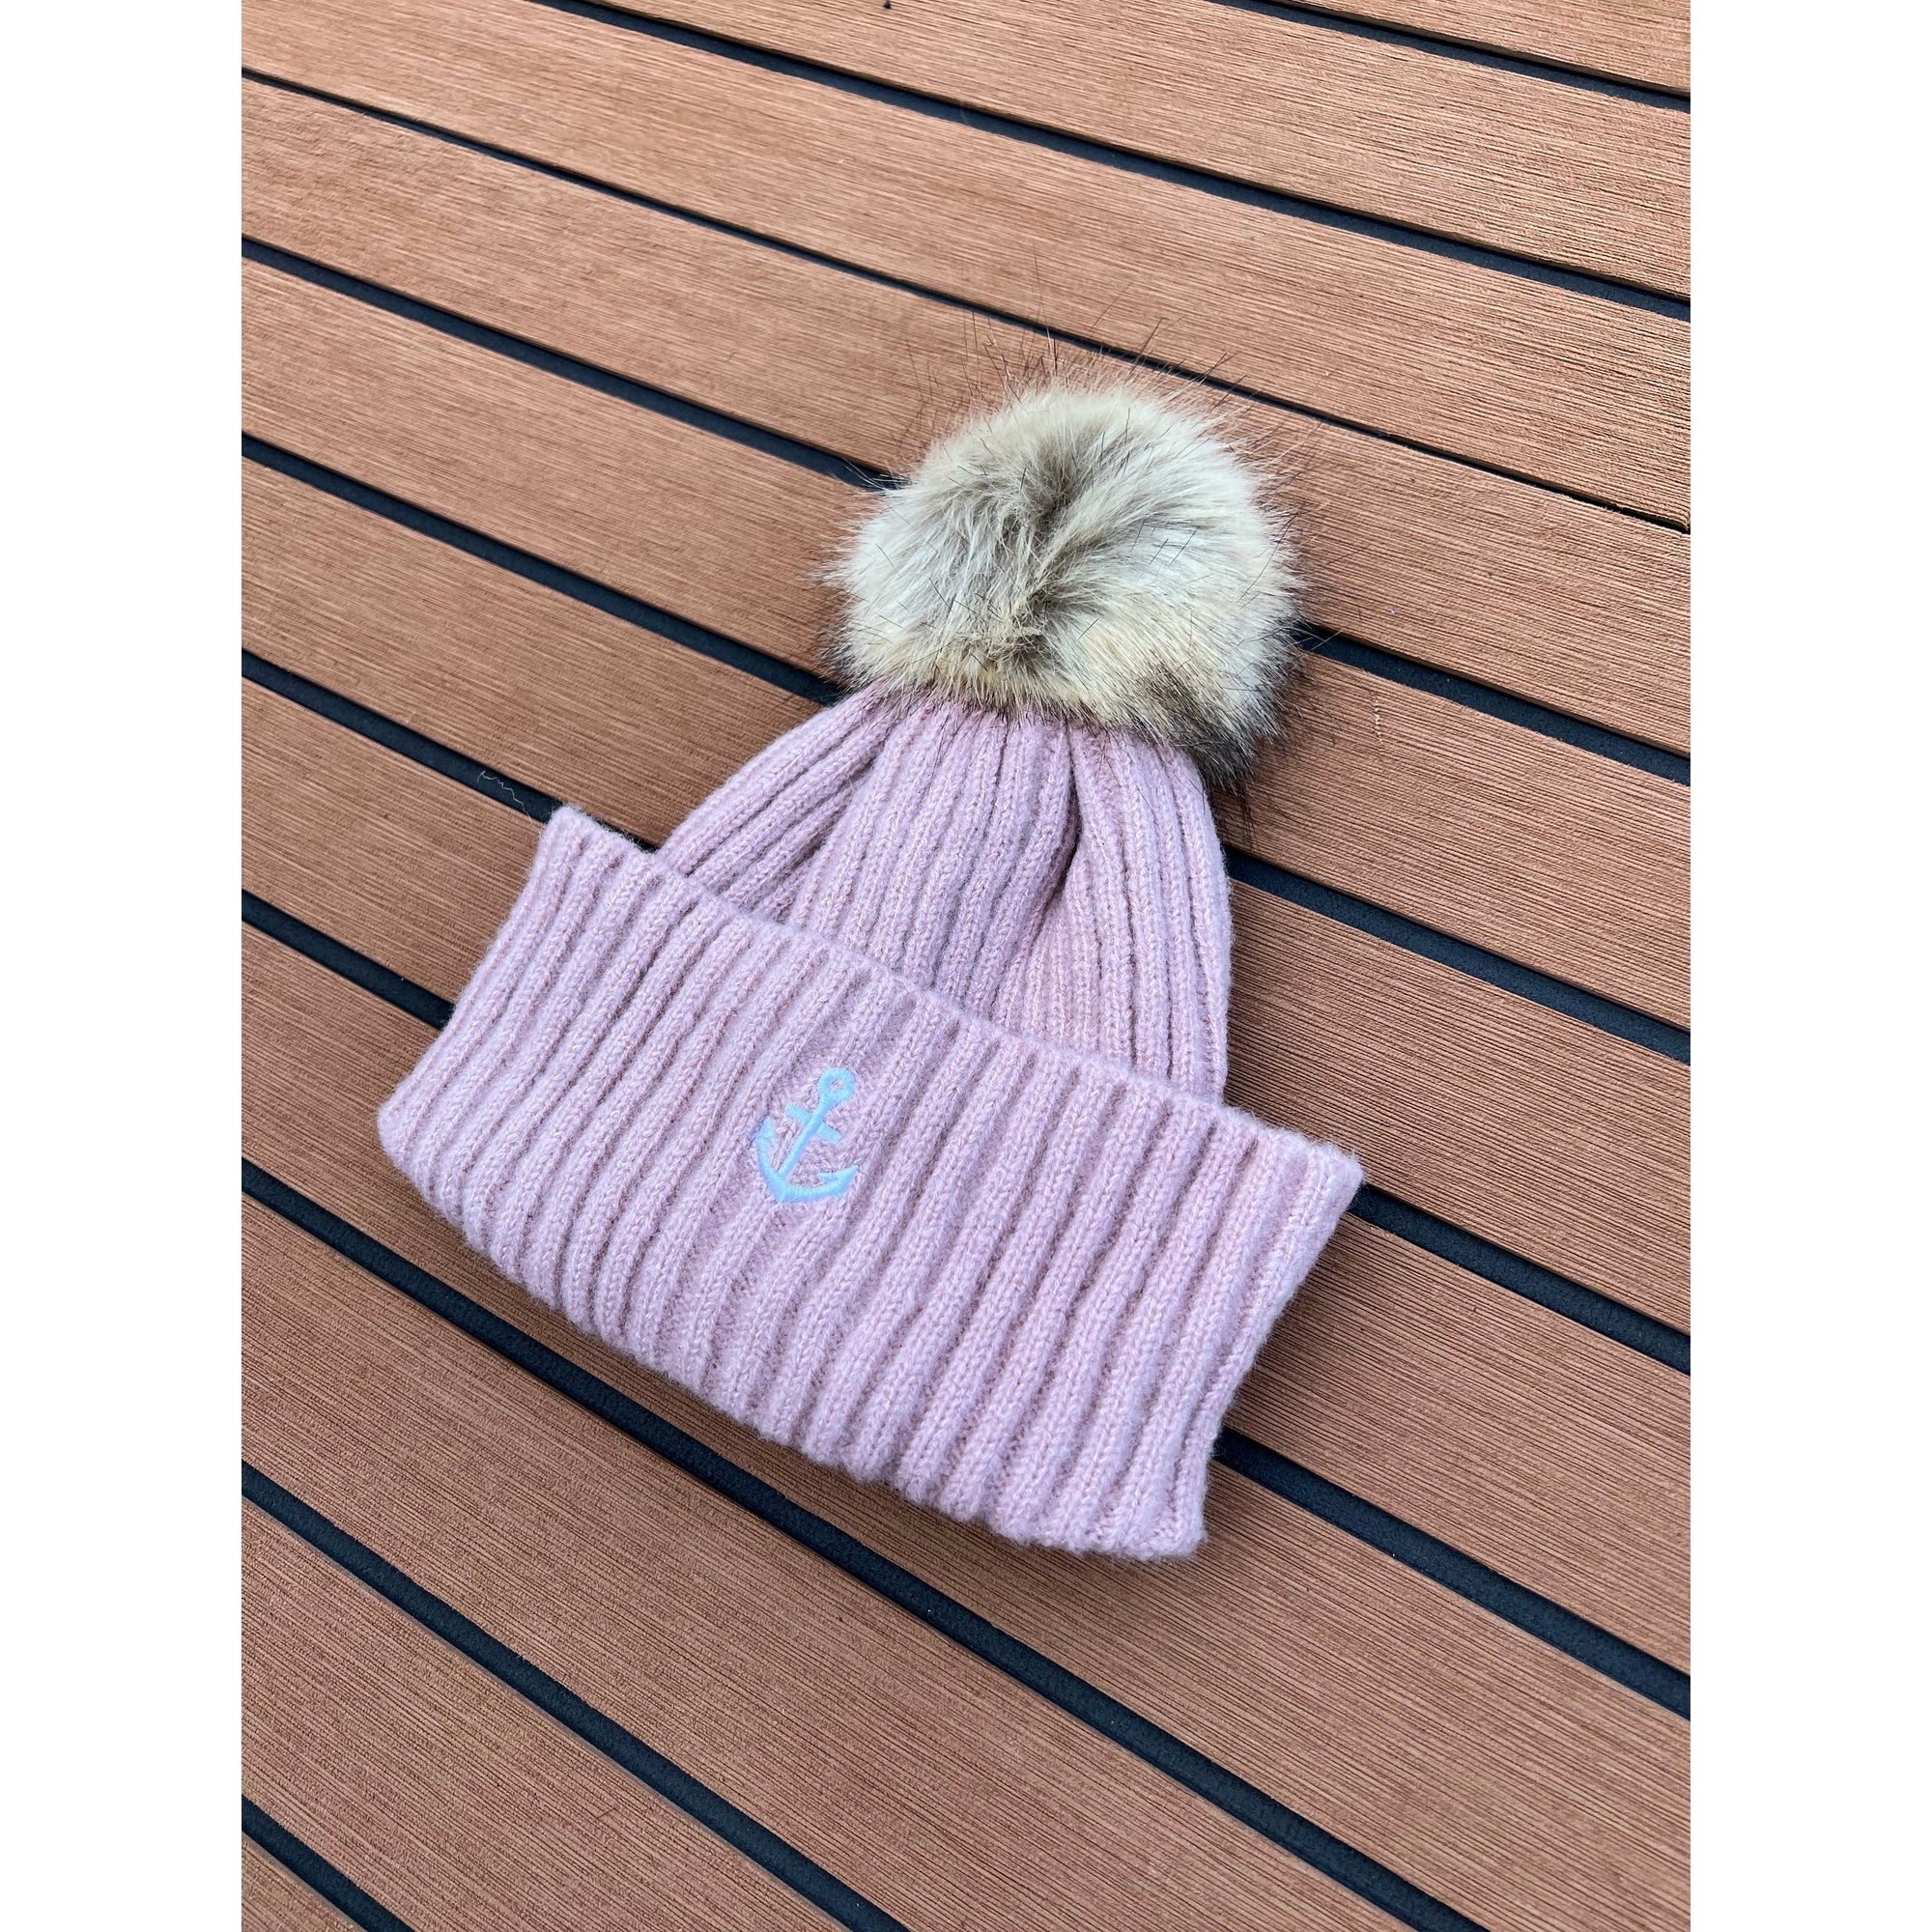 FORCE 10 OFFICIAL BOBBLE HAT - PINK